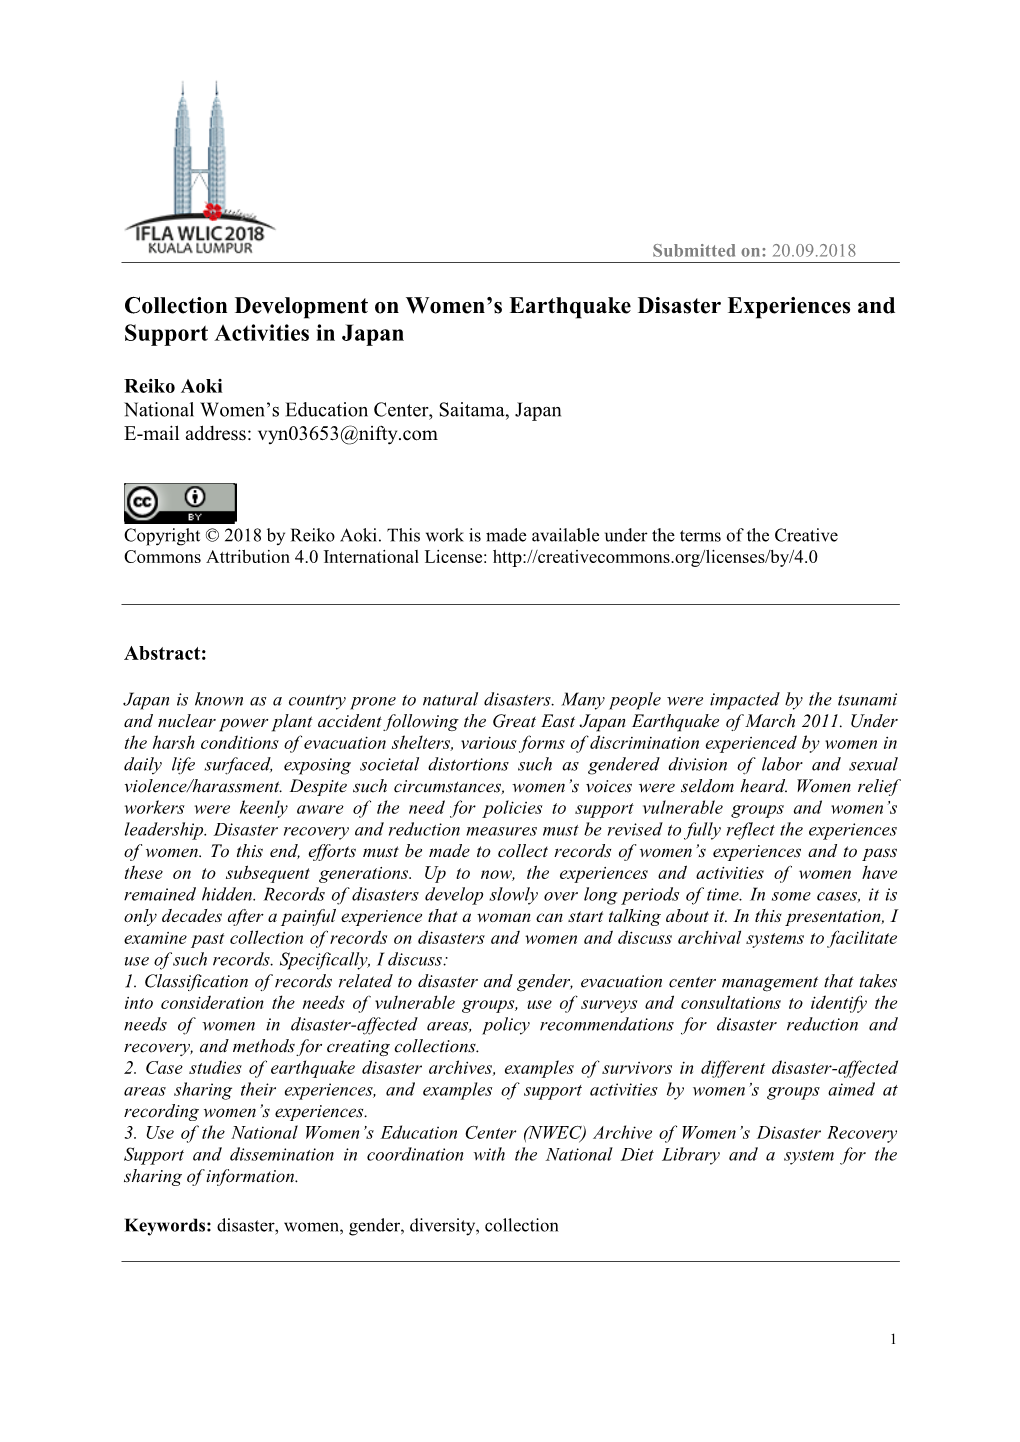 Collection Development on Women's Earthquake Disaster Experiences